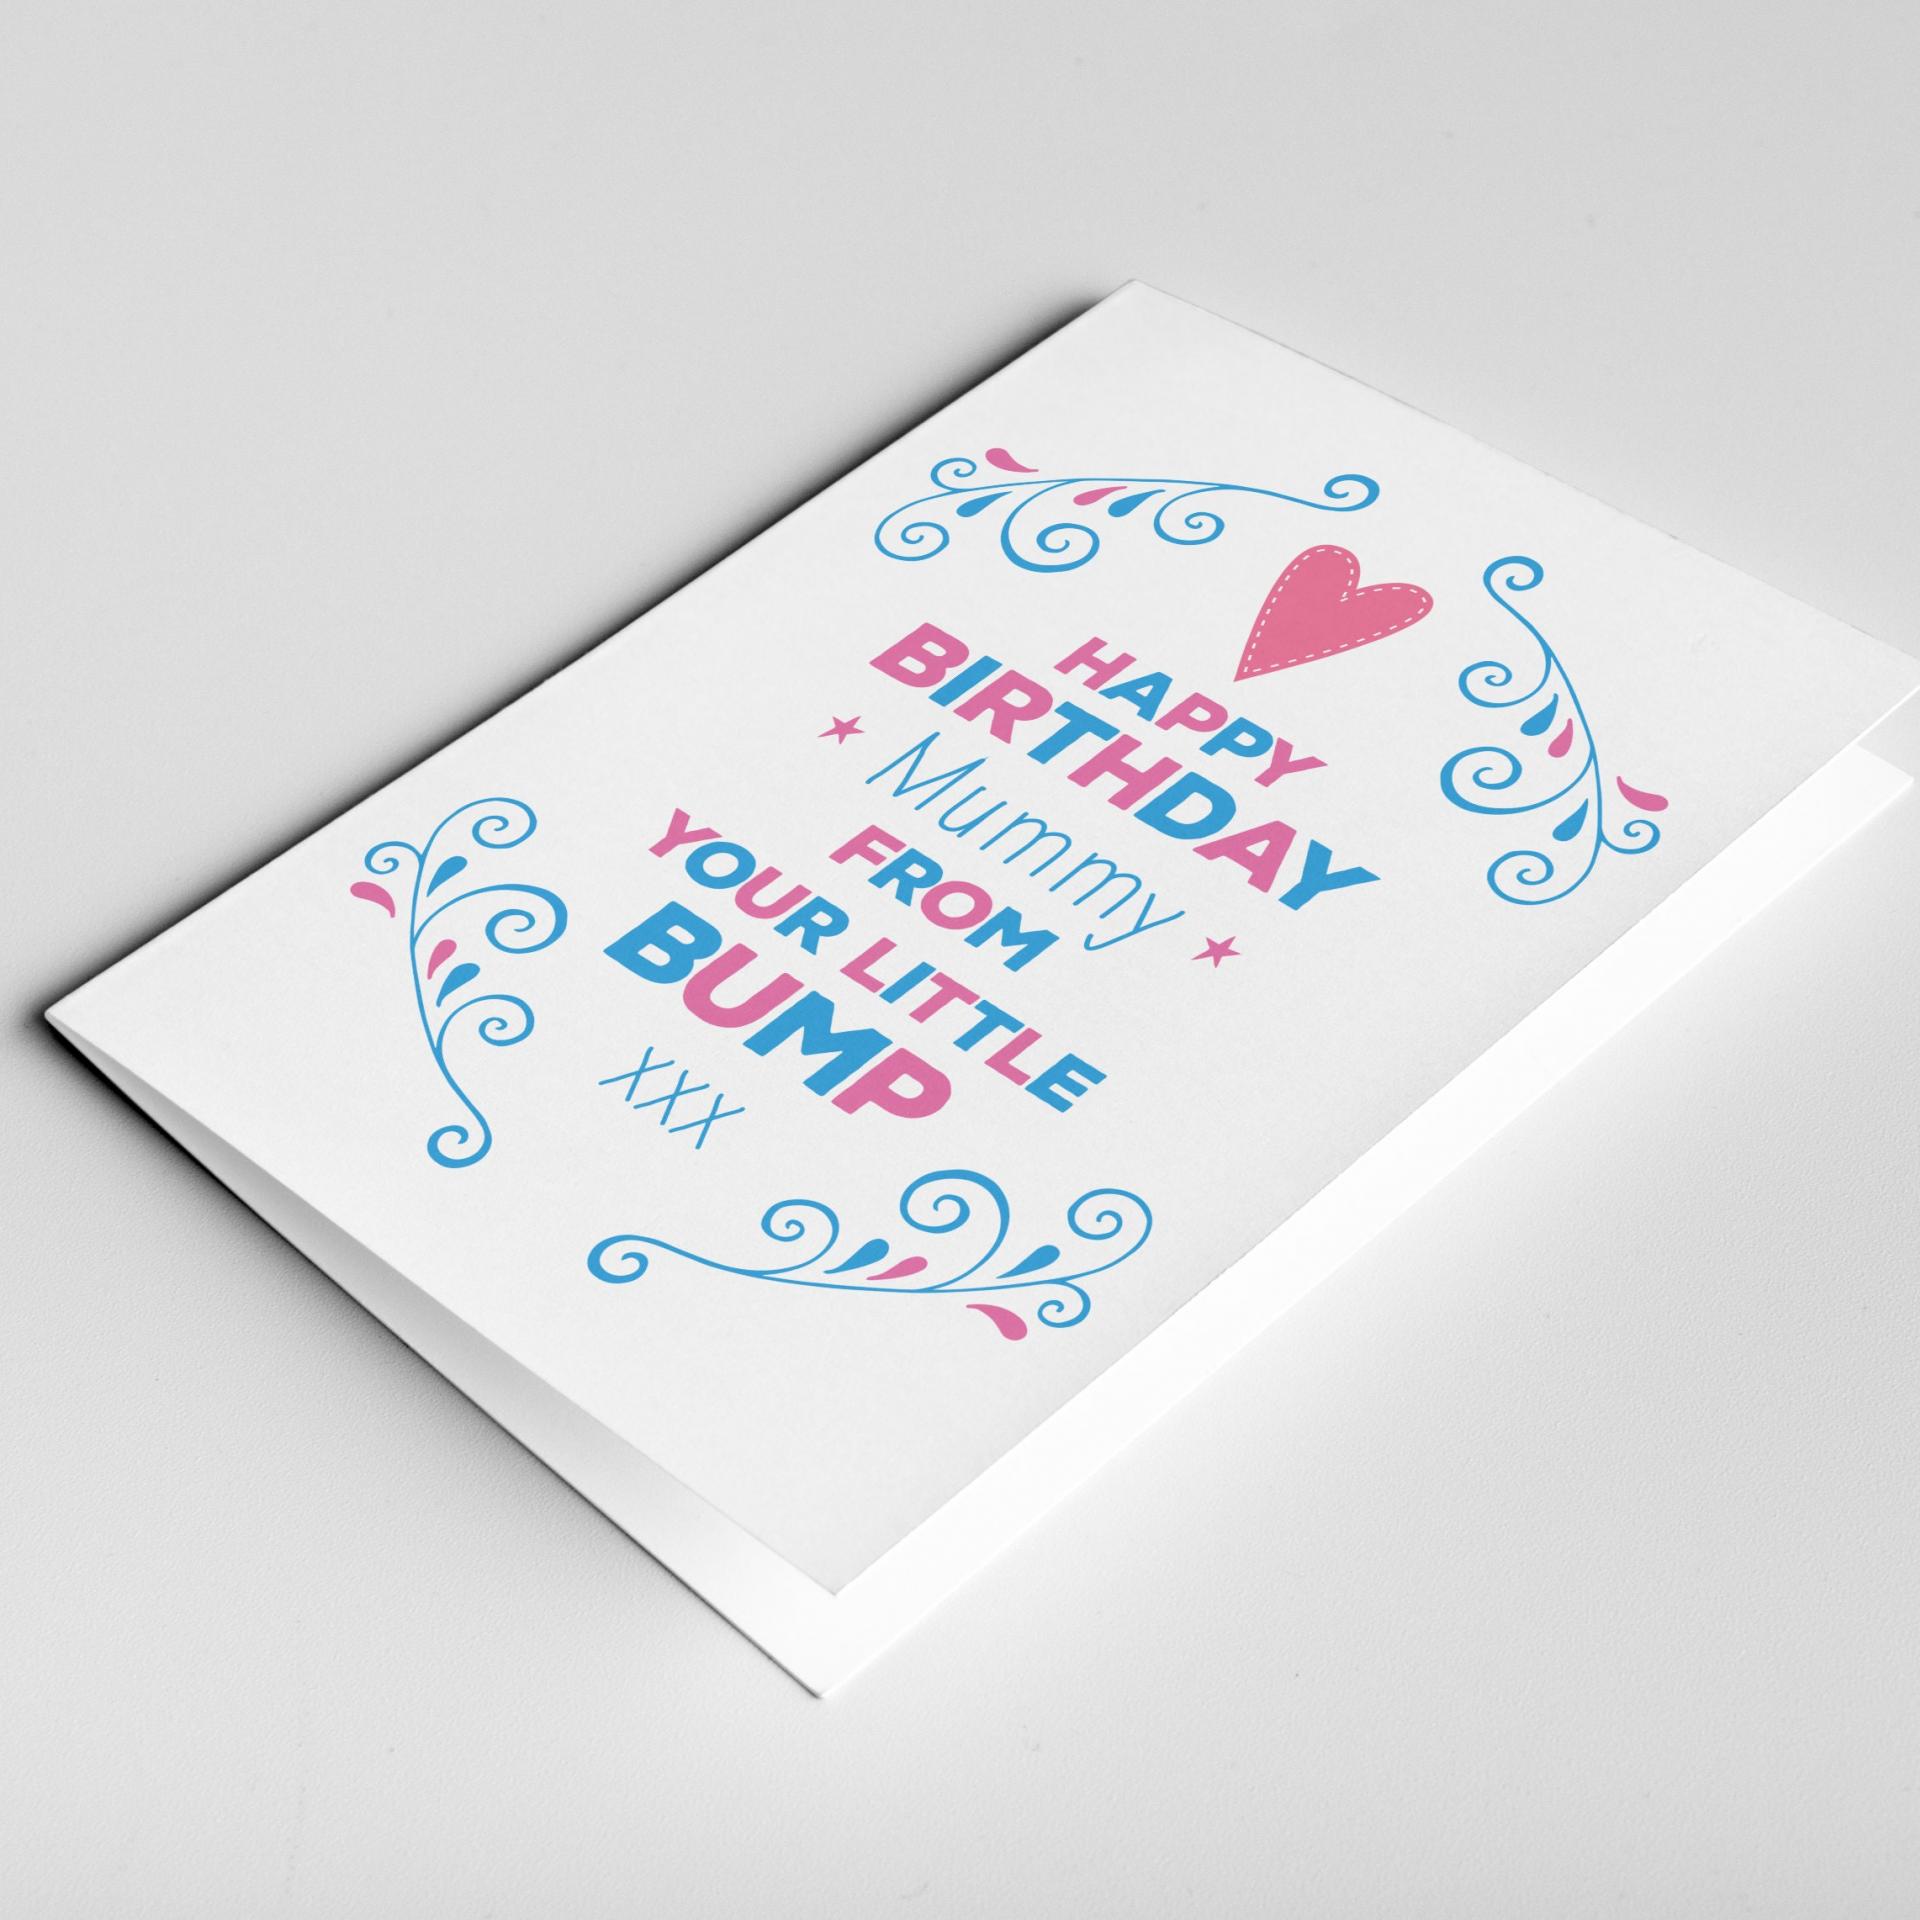 Happy Birthday Mummy From The Bump Card, Birthday Card from baby, Pregnant Birthday Card, Card for wife, Mom From The Bump, Expectant Mum